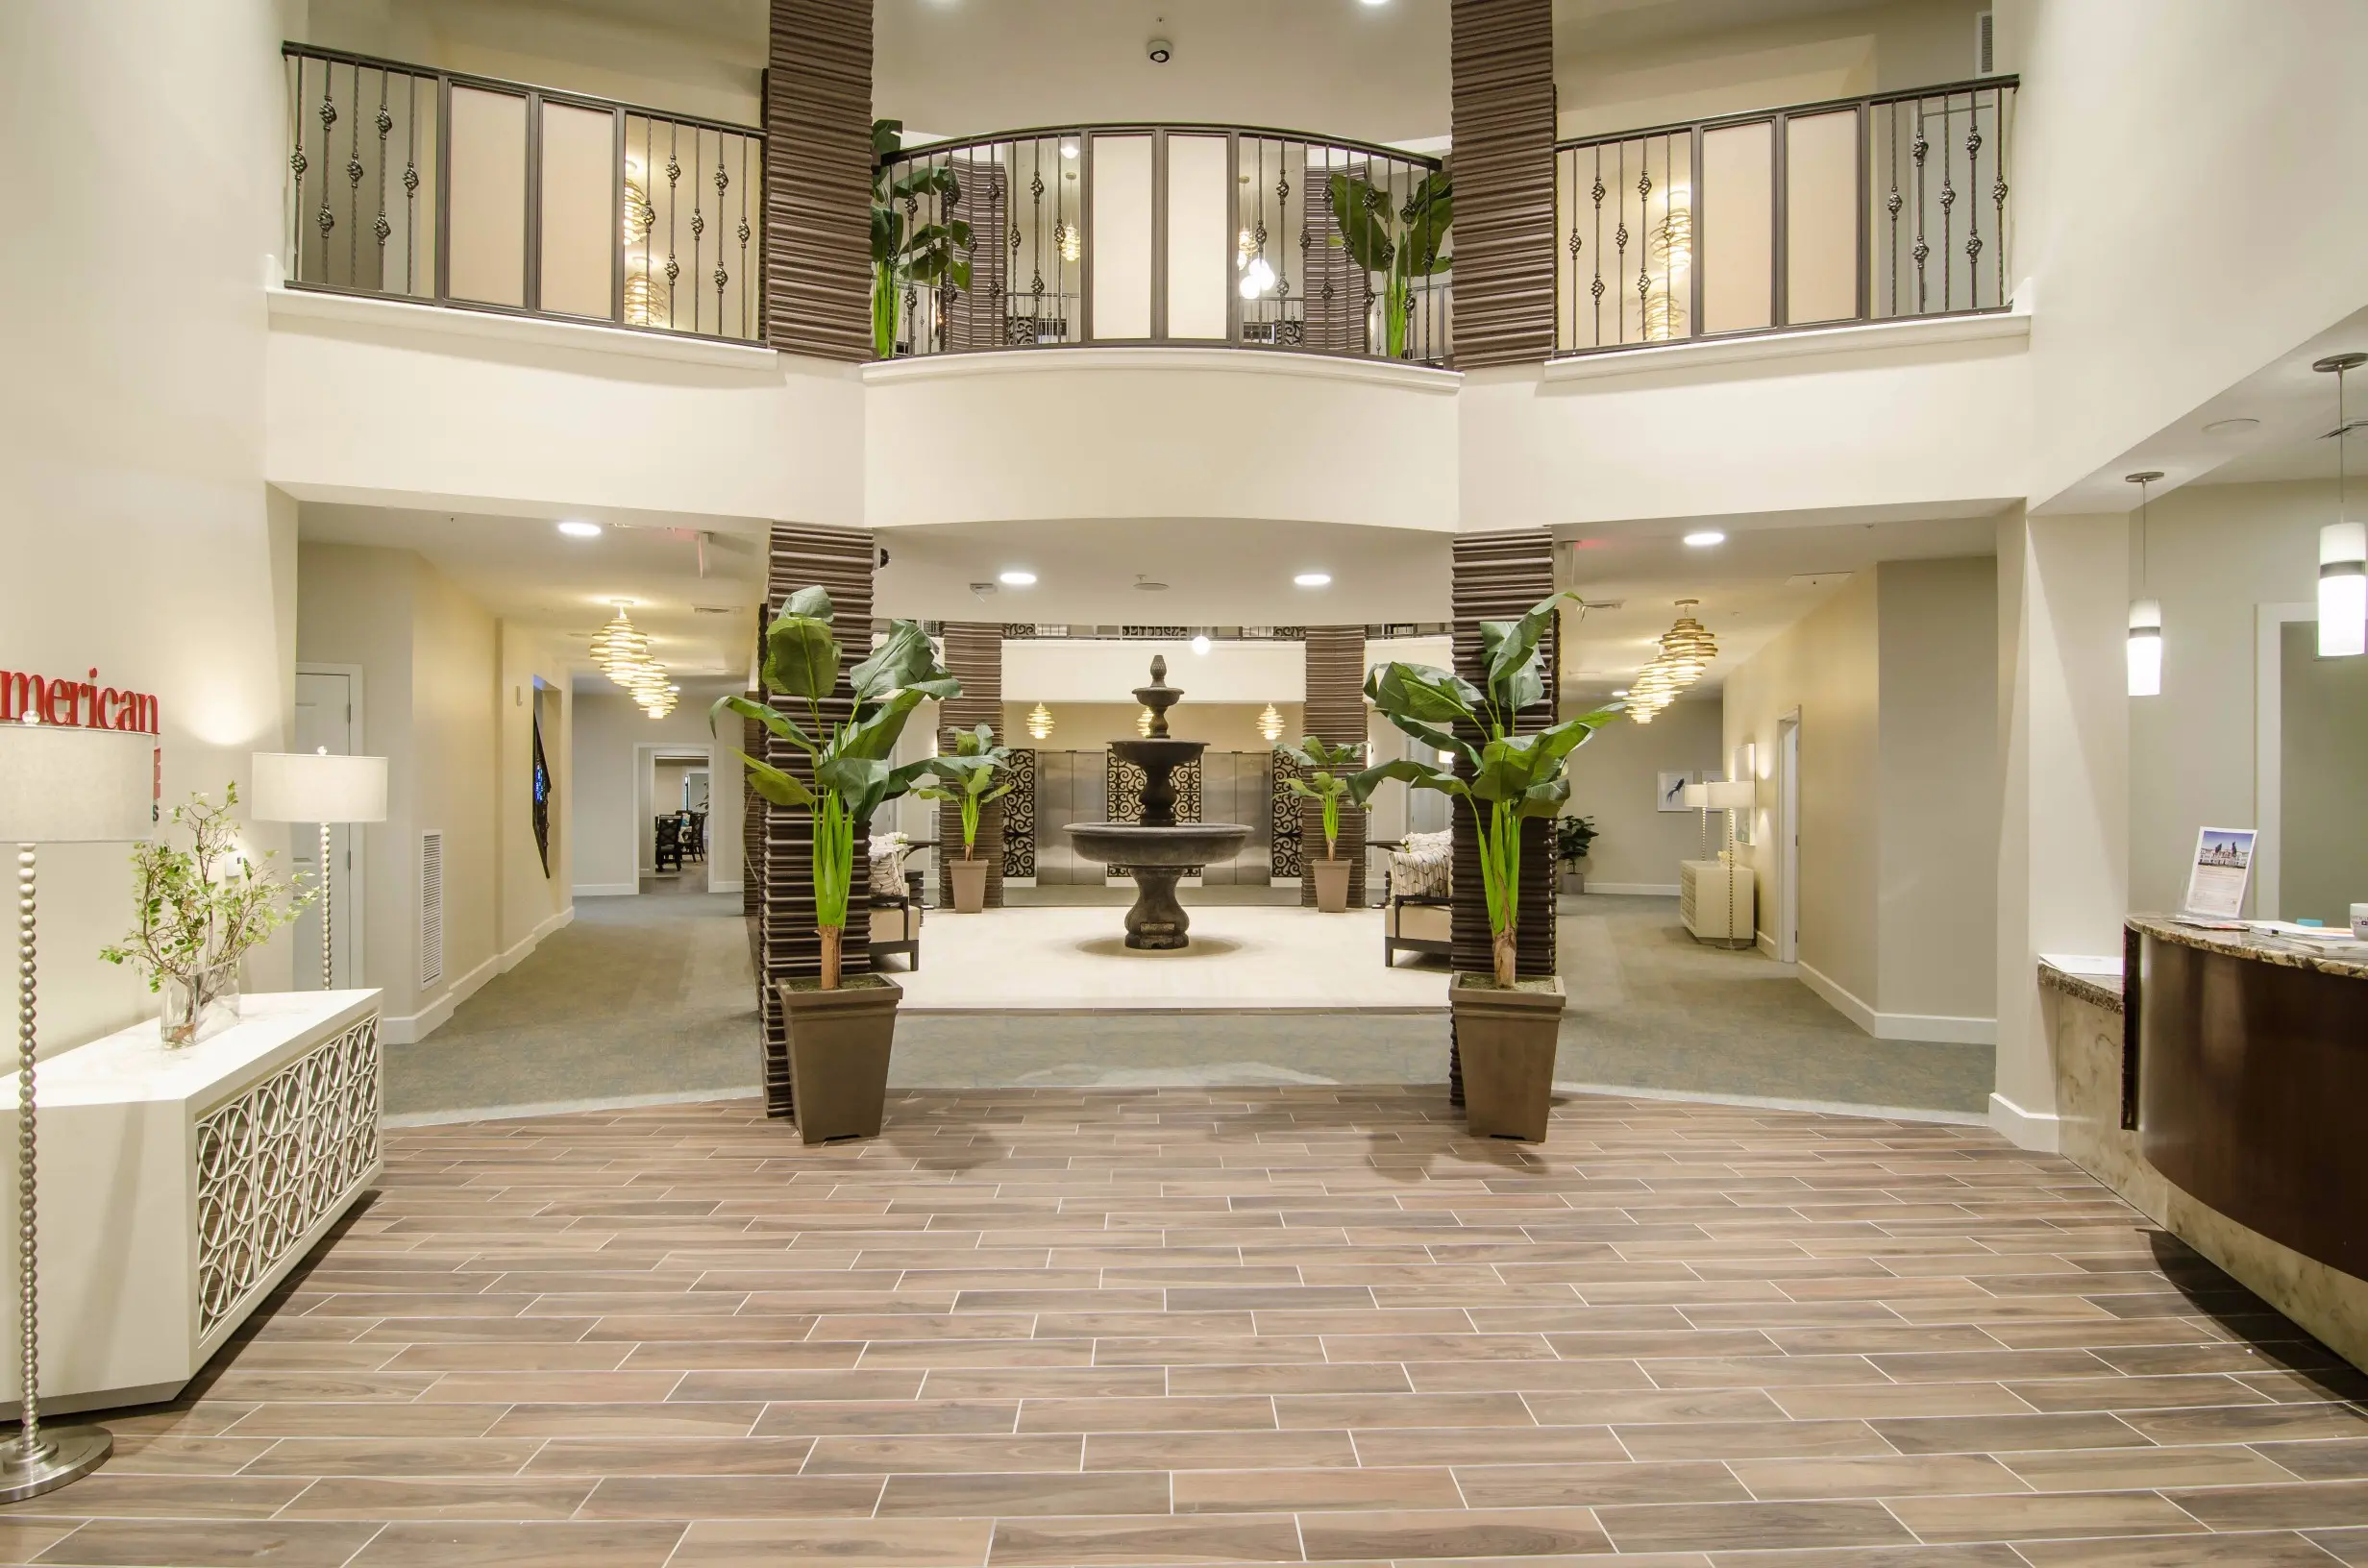 Lobby / fountain at American House Coconut Point, a retirement community in Estero, FL